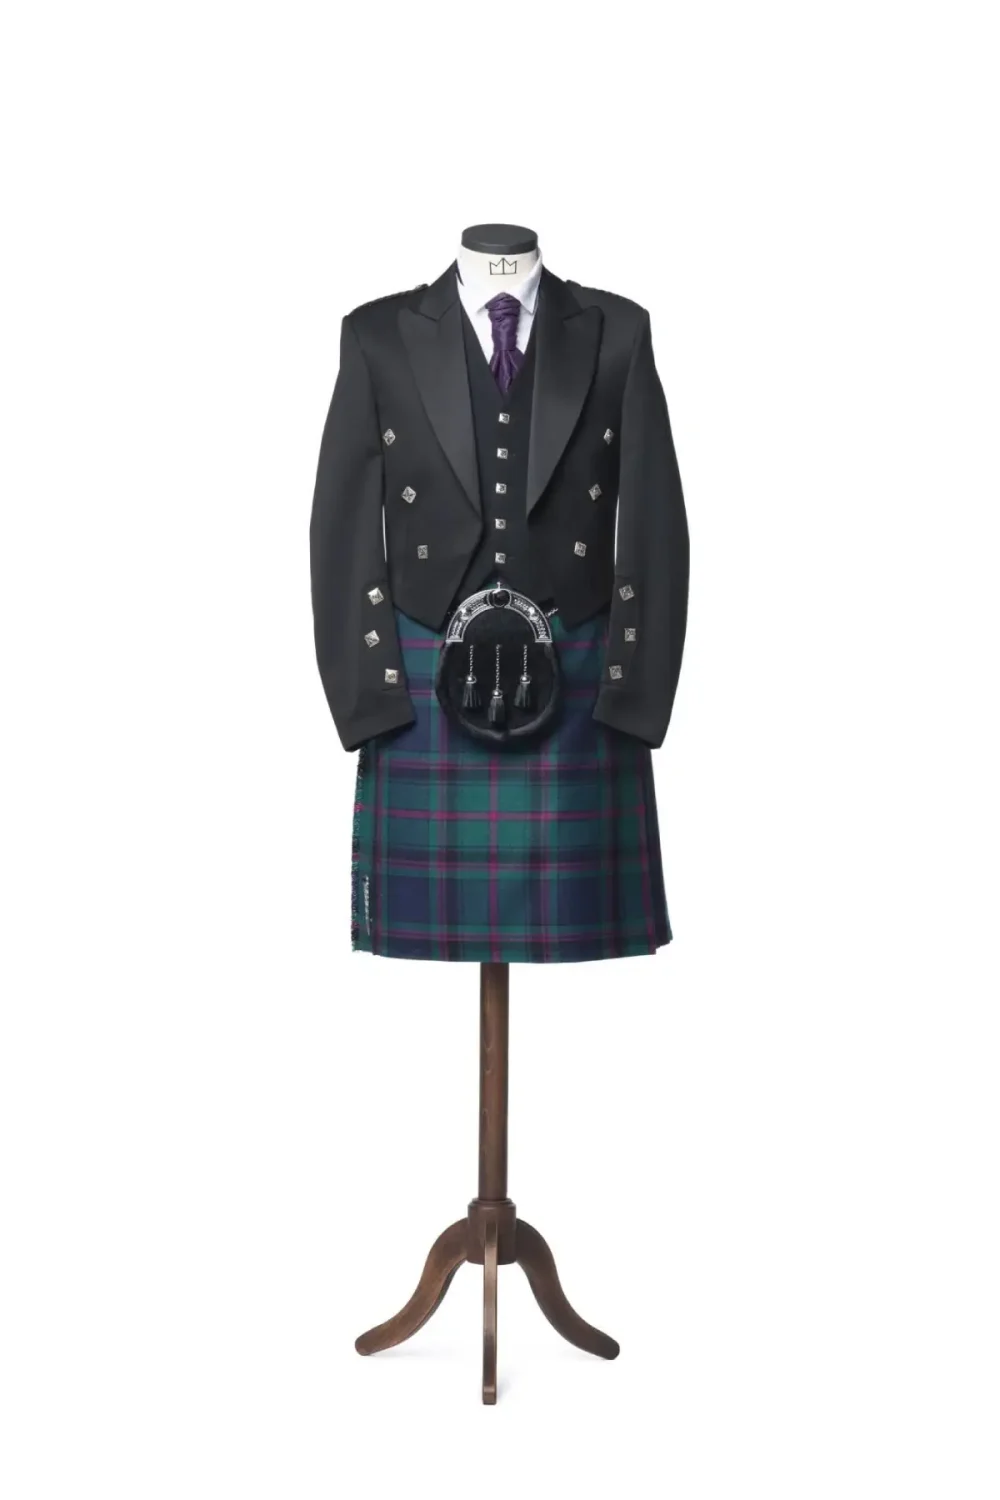 A Prince Charlie Kilt Outfit with 5 button Vest hanged in a hanger.